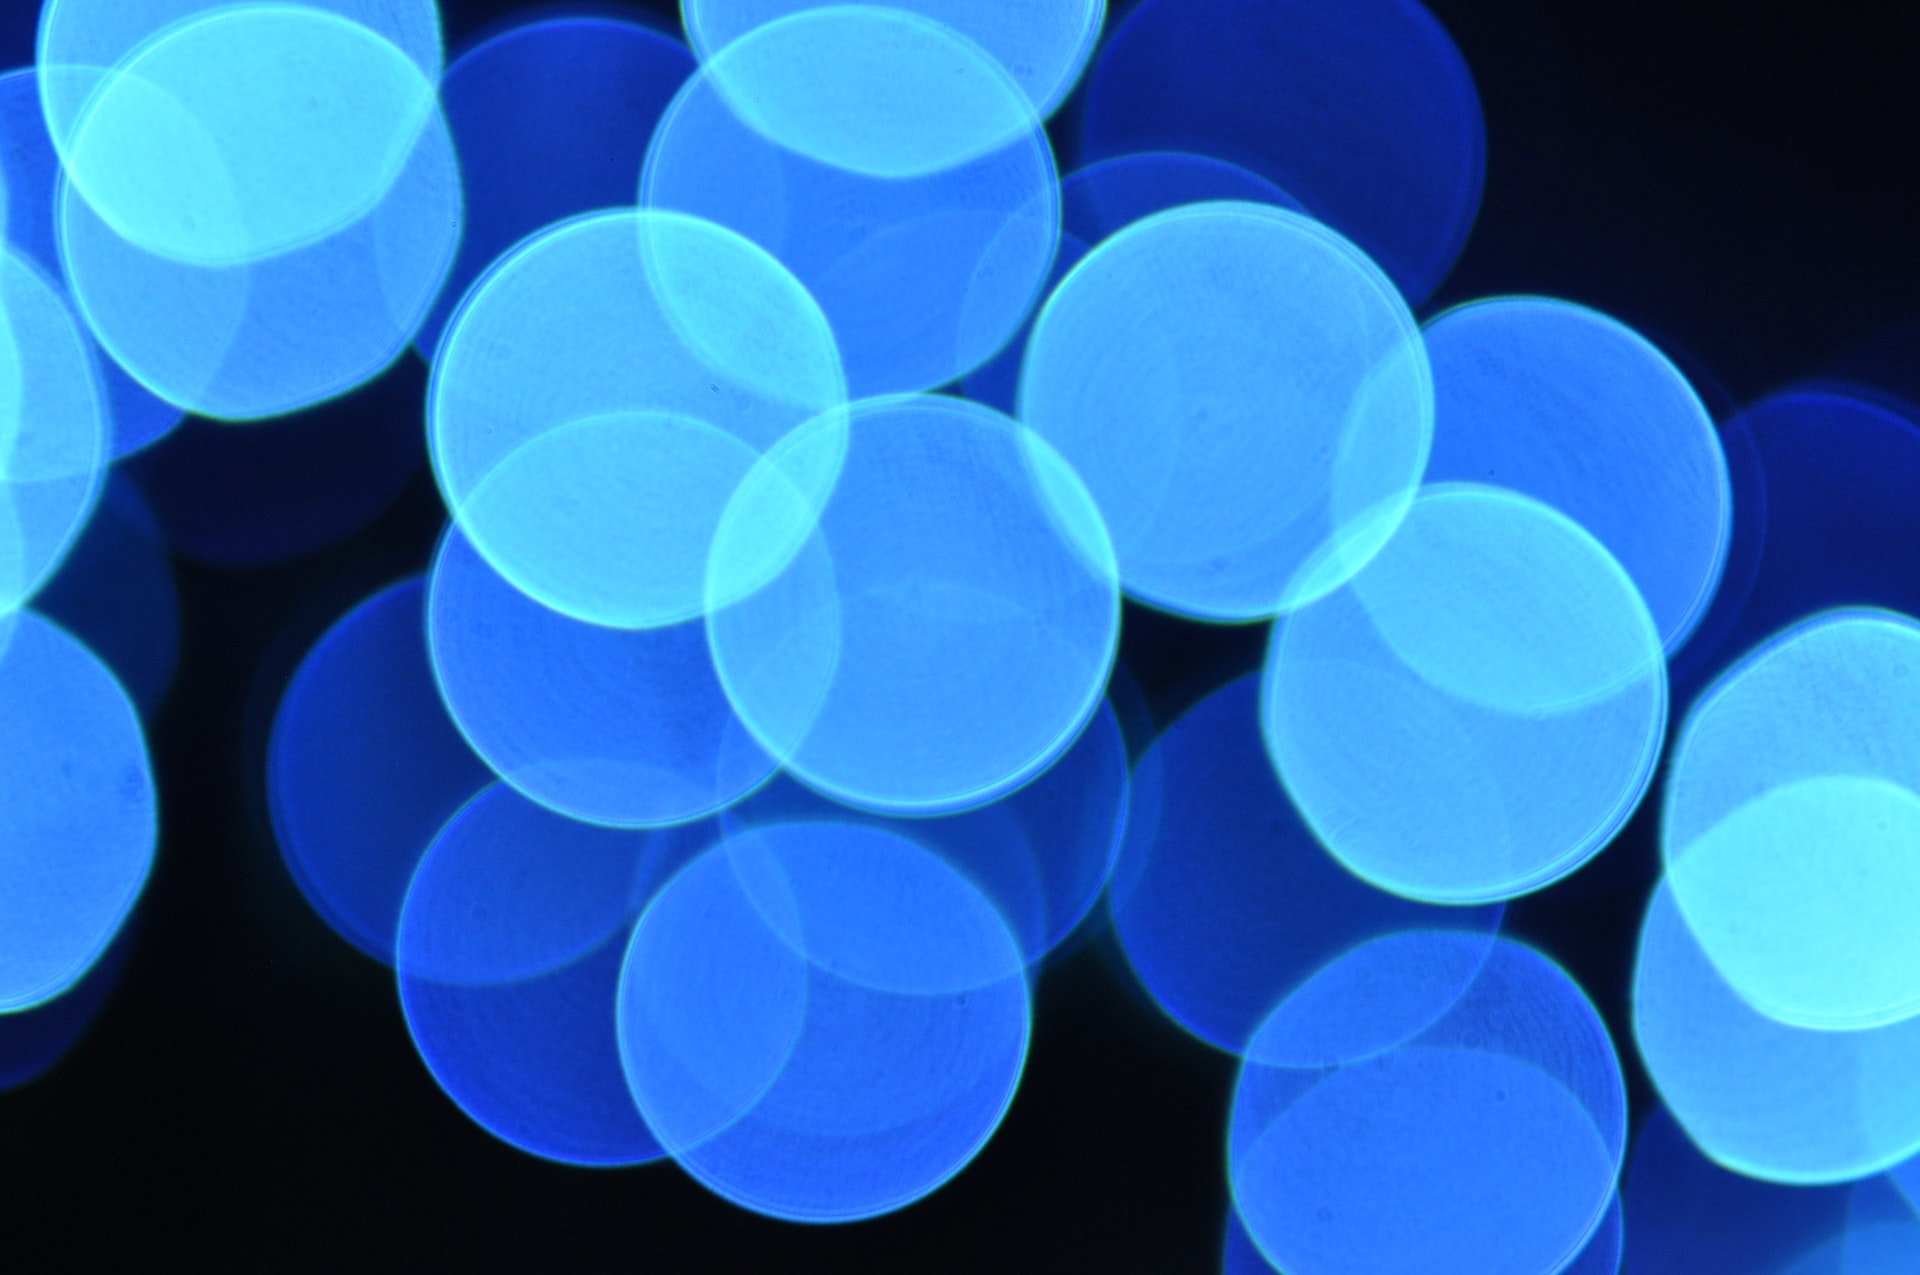 Transparent blue circles overlapping one another on a black background.